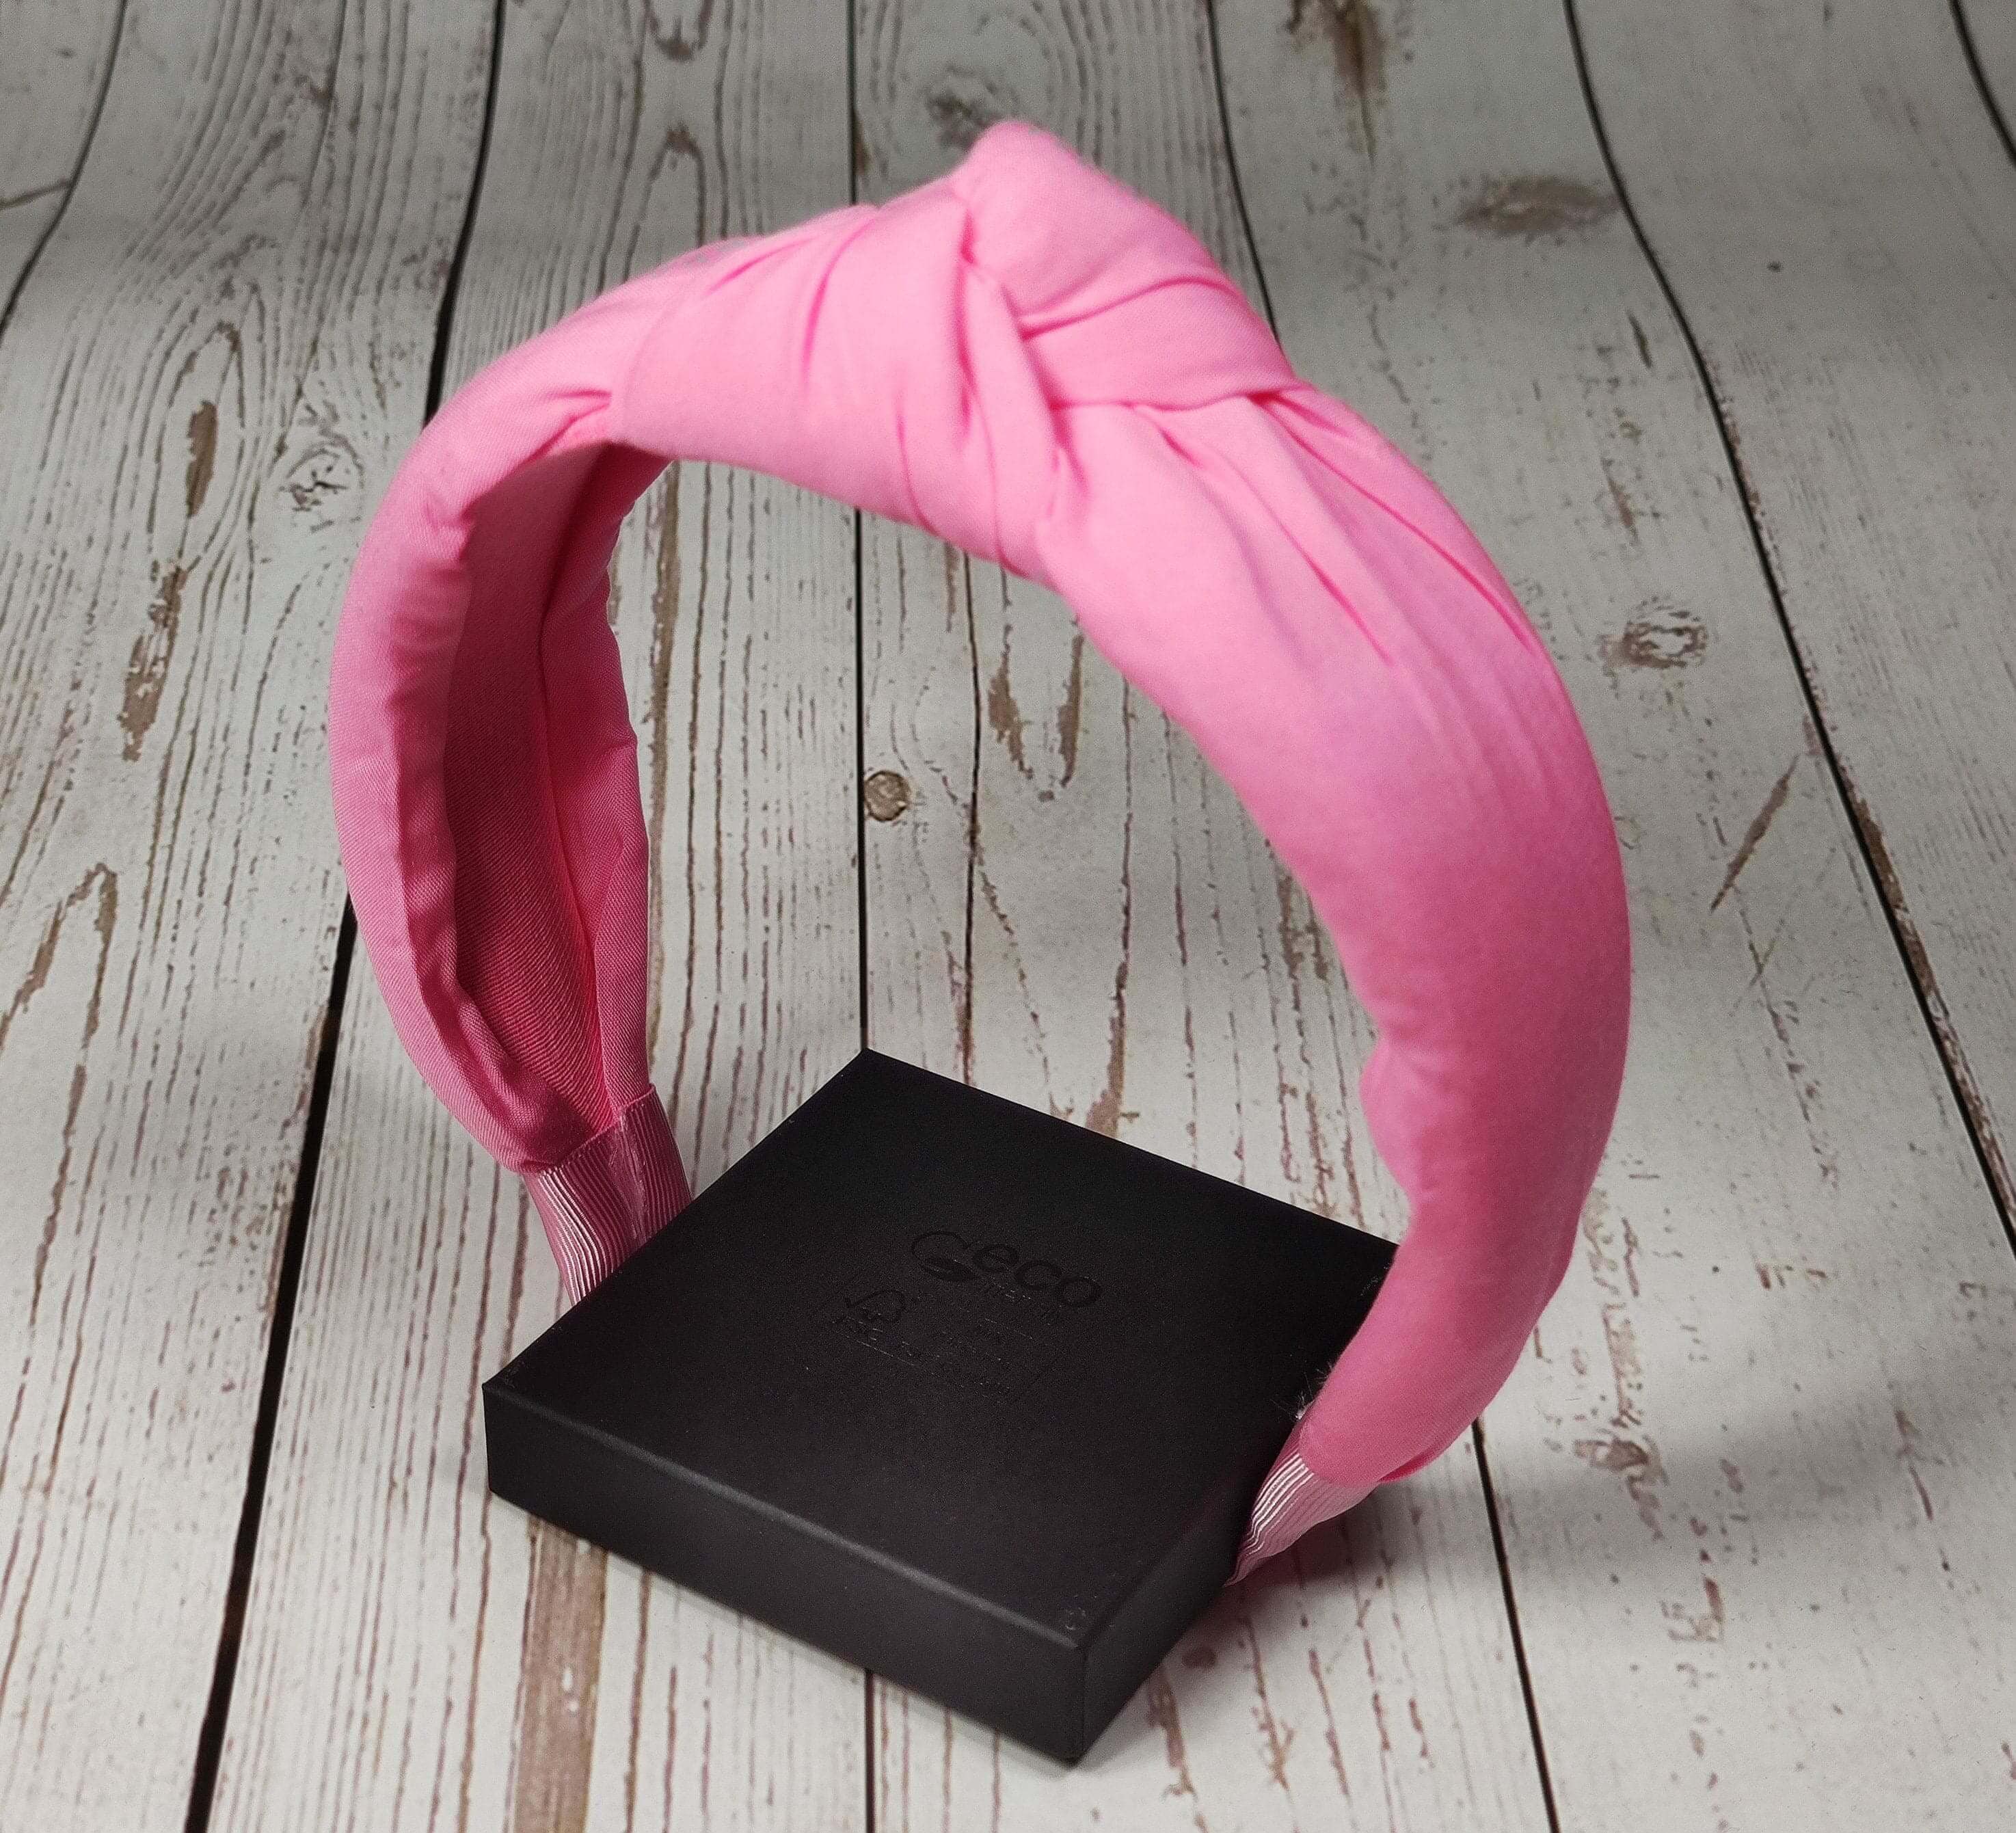 Oking for the perfect personalized headband? Look no further than our wide selection of light pink headbands! these headbands are perfect for women of all ages. From sophisticated headbands to playful tie headbands, we have a headband for you!